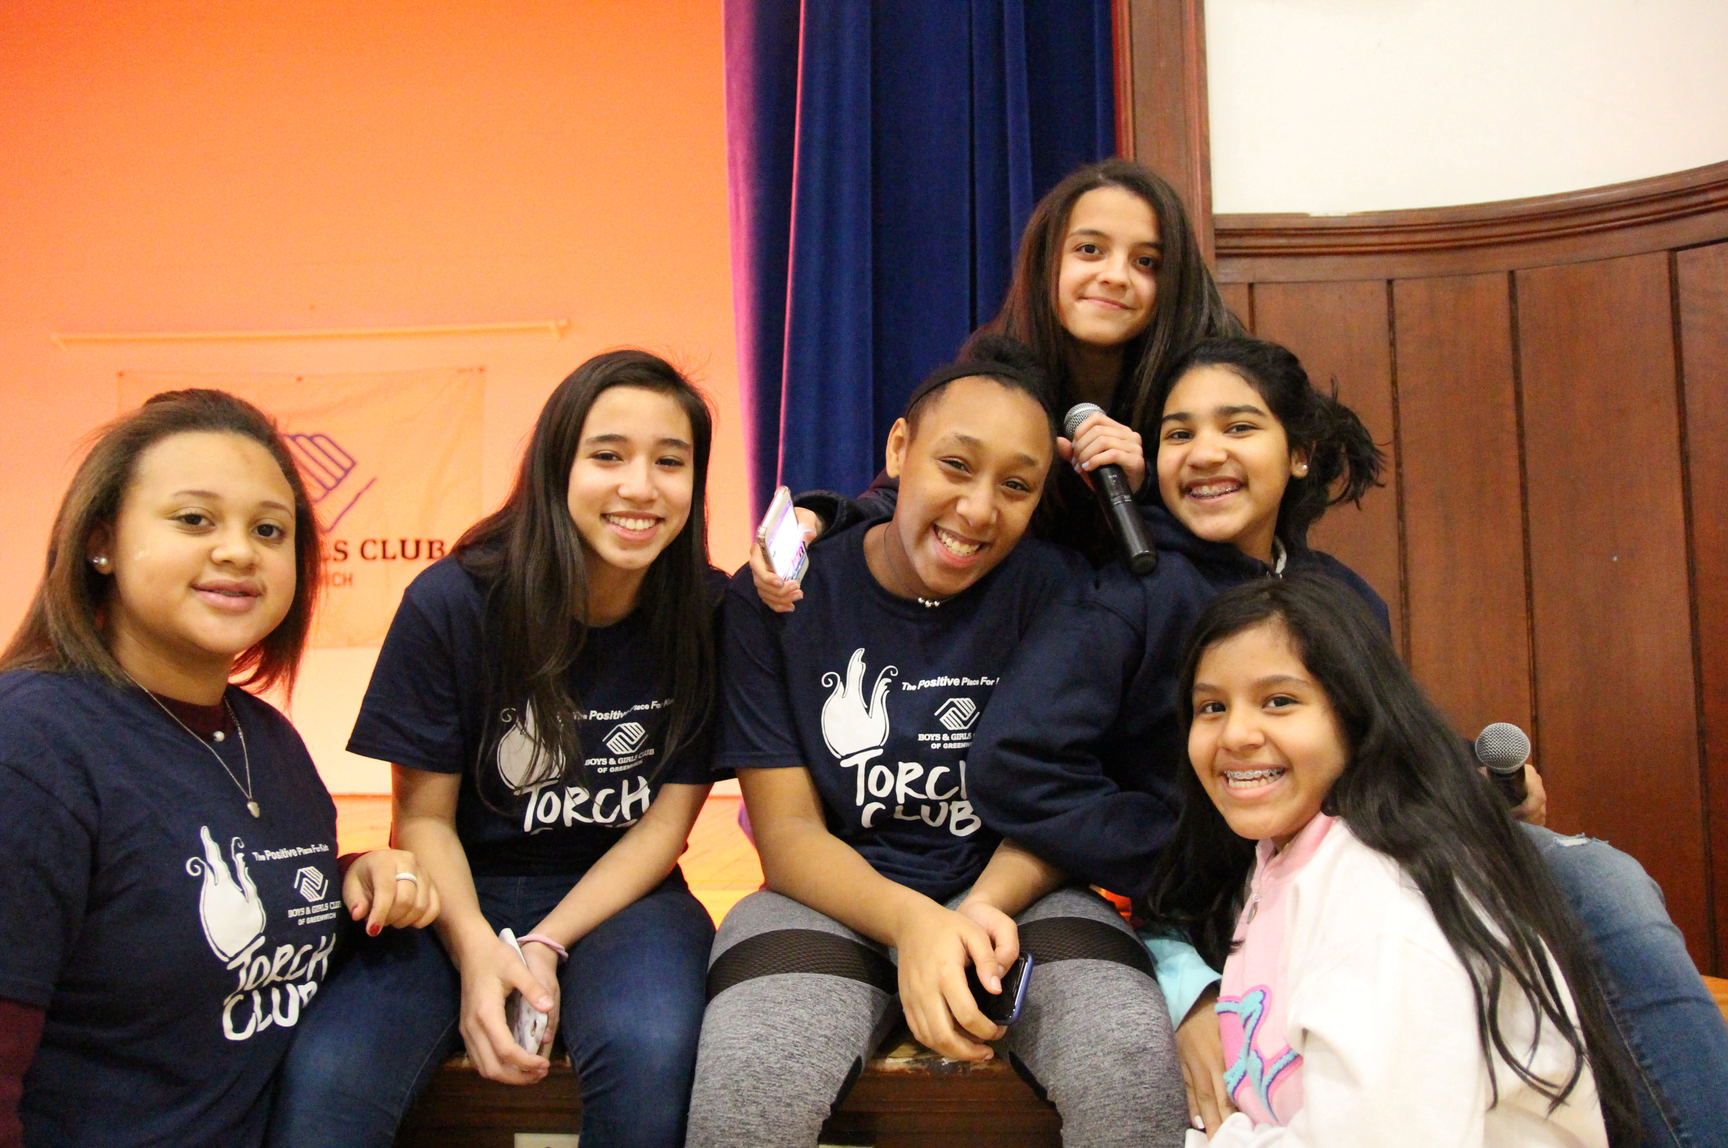 Torch Club members helped out at the Boys & Girls Club of Greenwich during a fashion show of Old Navy outfits. Friday Jan 26, 2018 Photo: Leslie Yager